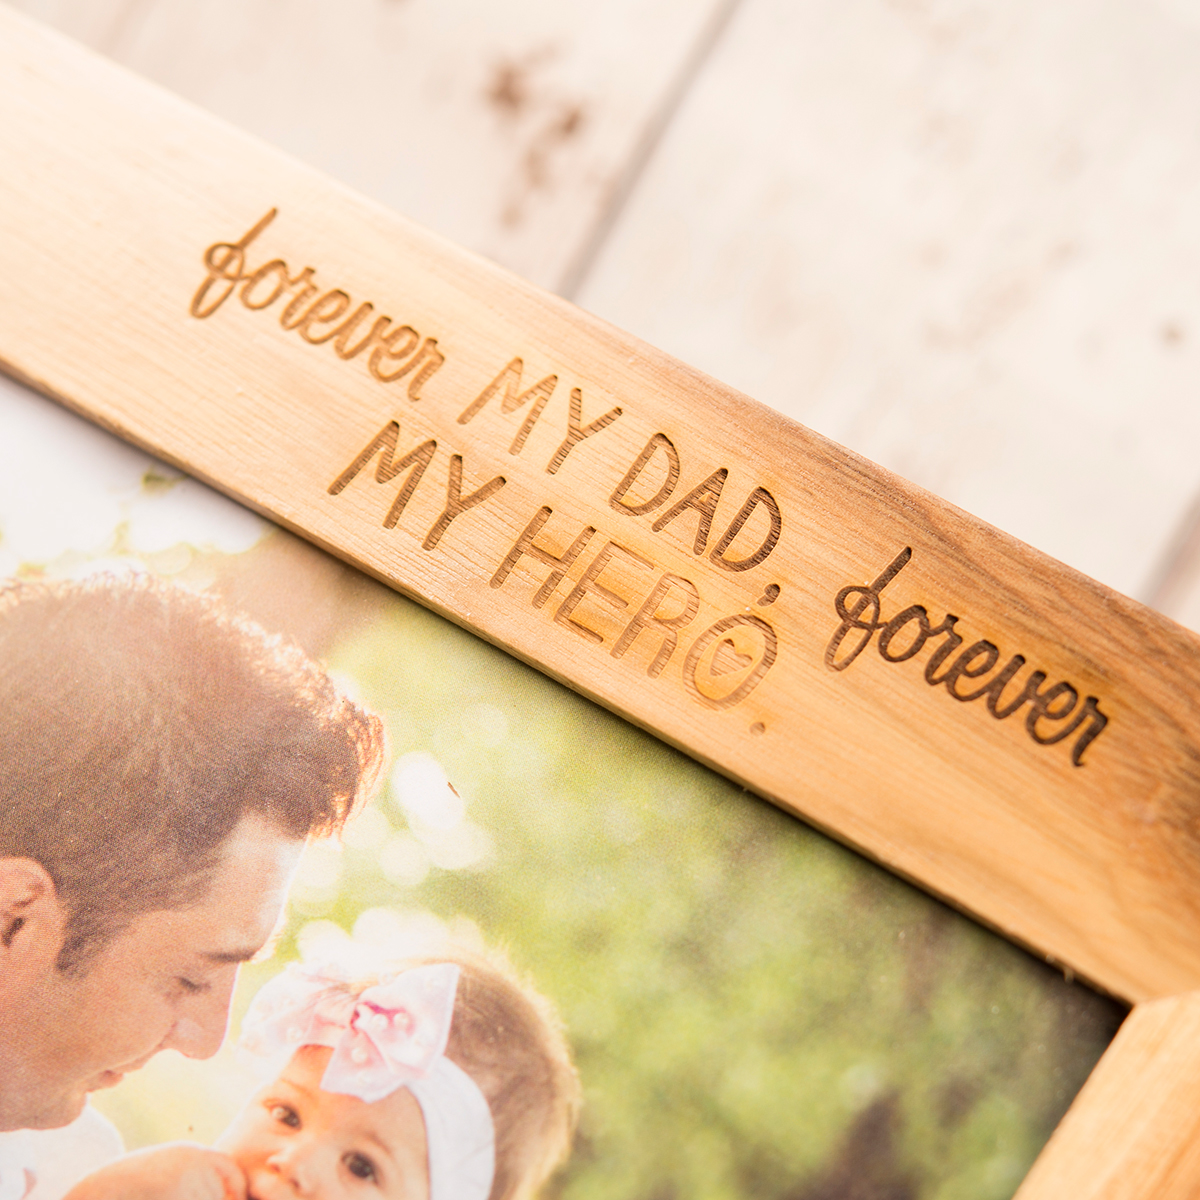 Personalised Wooden Photo Frame - Forever My Dad